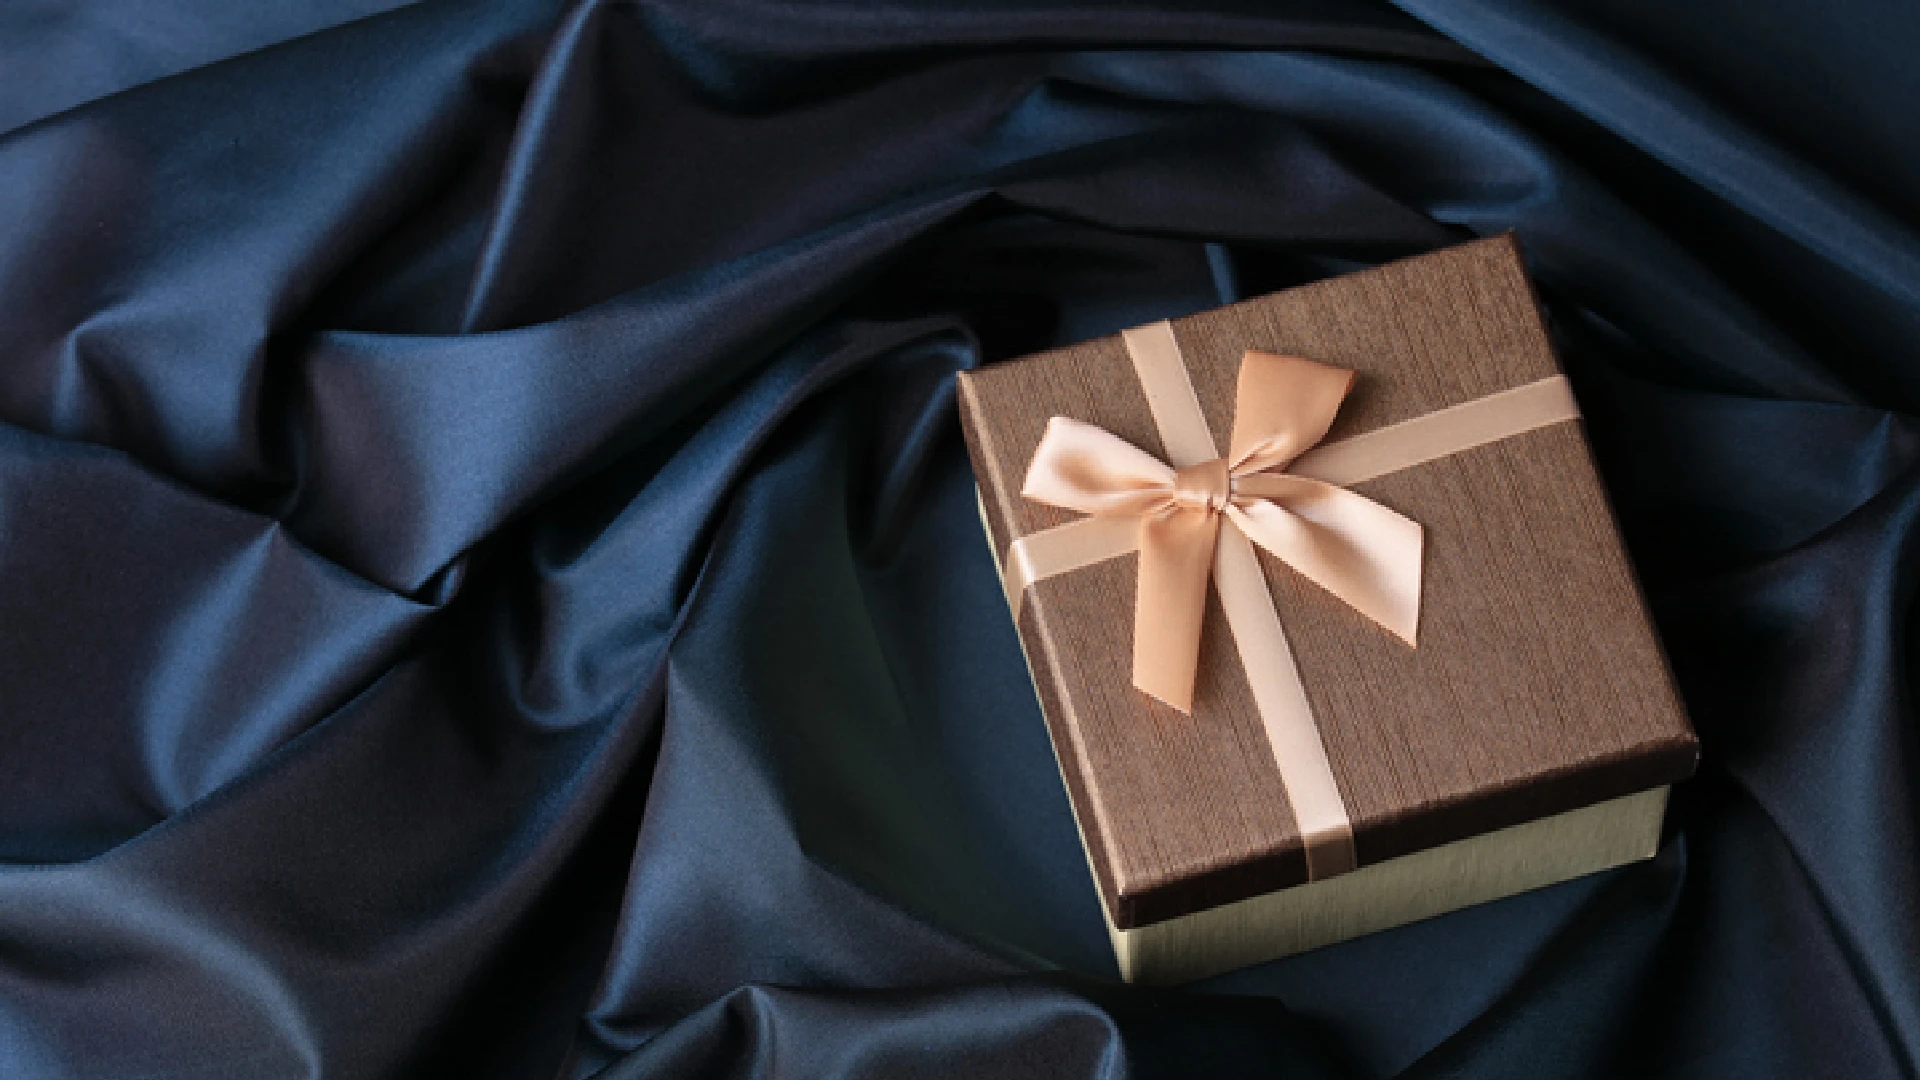 10 Luxury Things to Keep in Mind for Gifting This Holiday Season